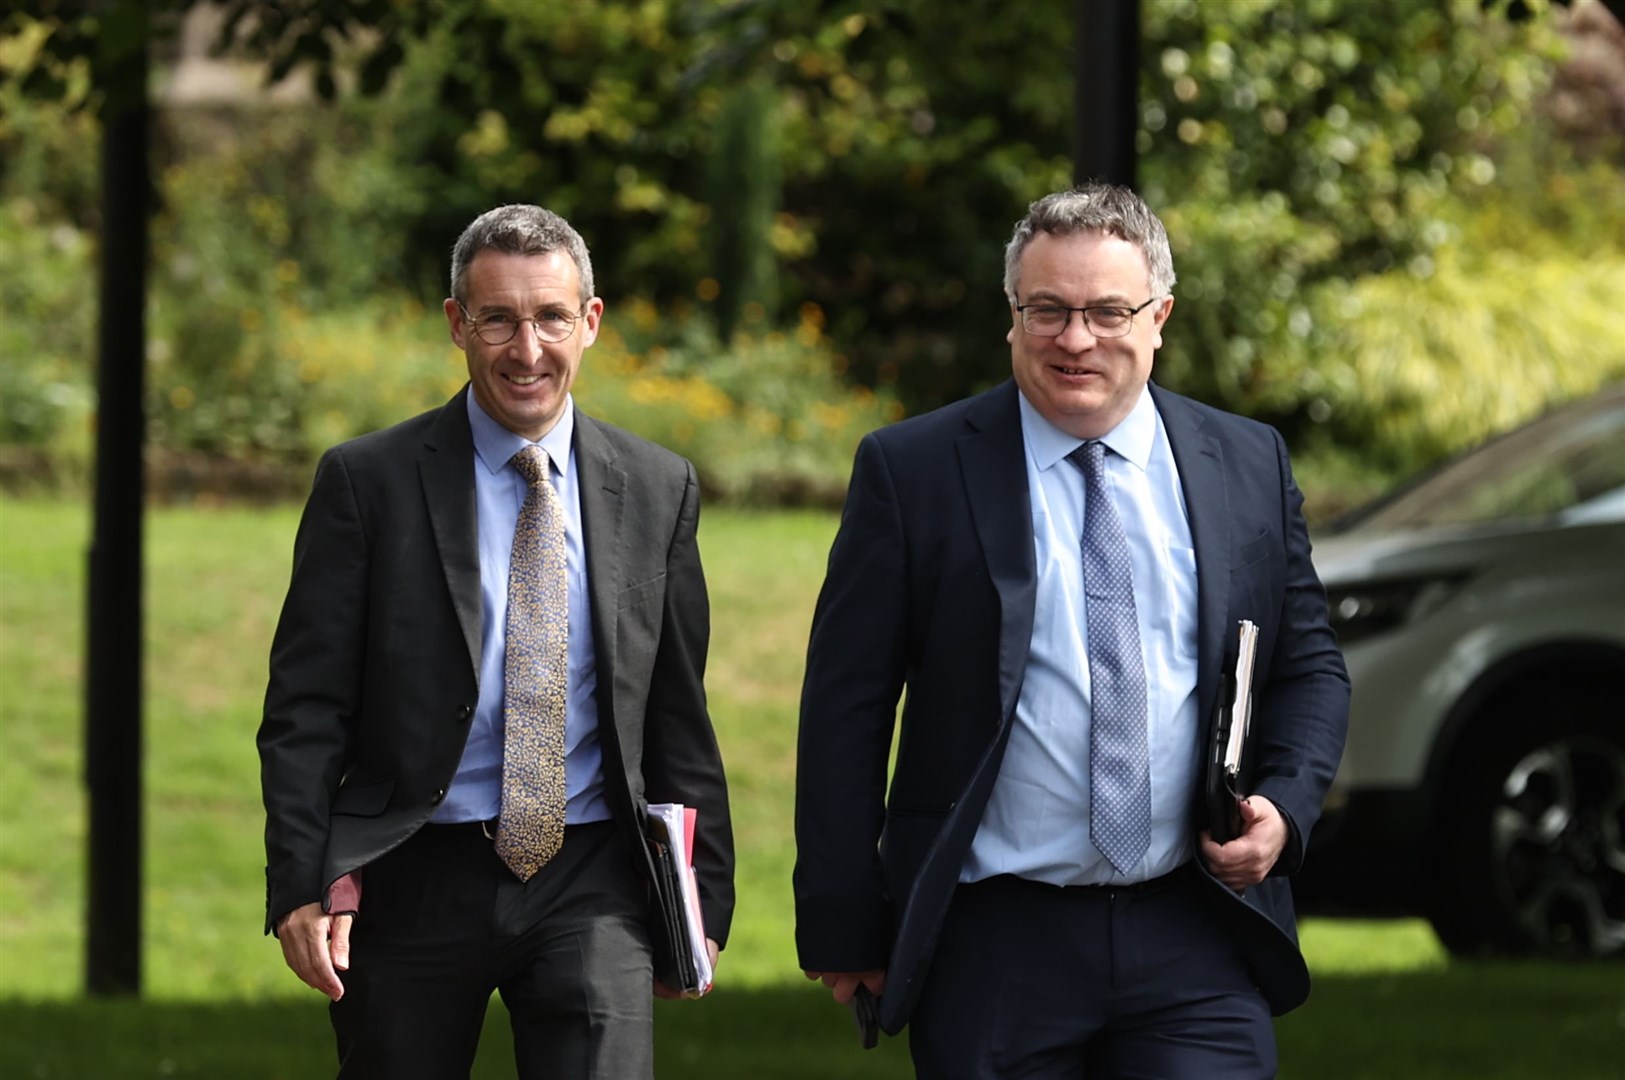 Alliance Party Andrew Muir (left) and Stephen Farry arriving at Stormont Castle in Belfast (Liam McBurney/PA)